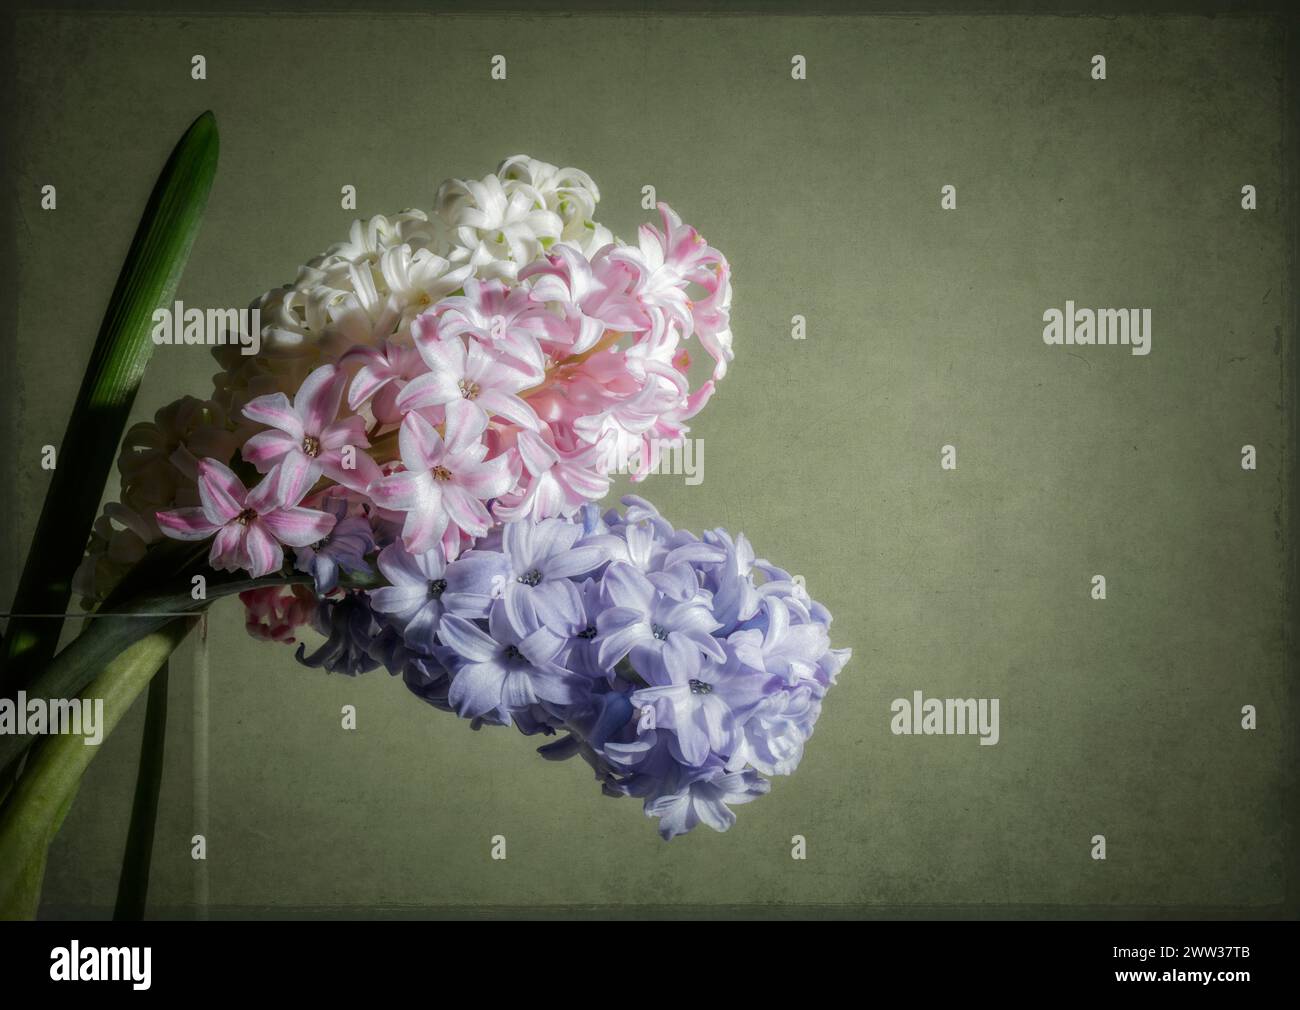 Three Hyacinths in vase with texture overlay Stock Photo